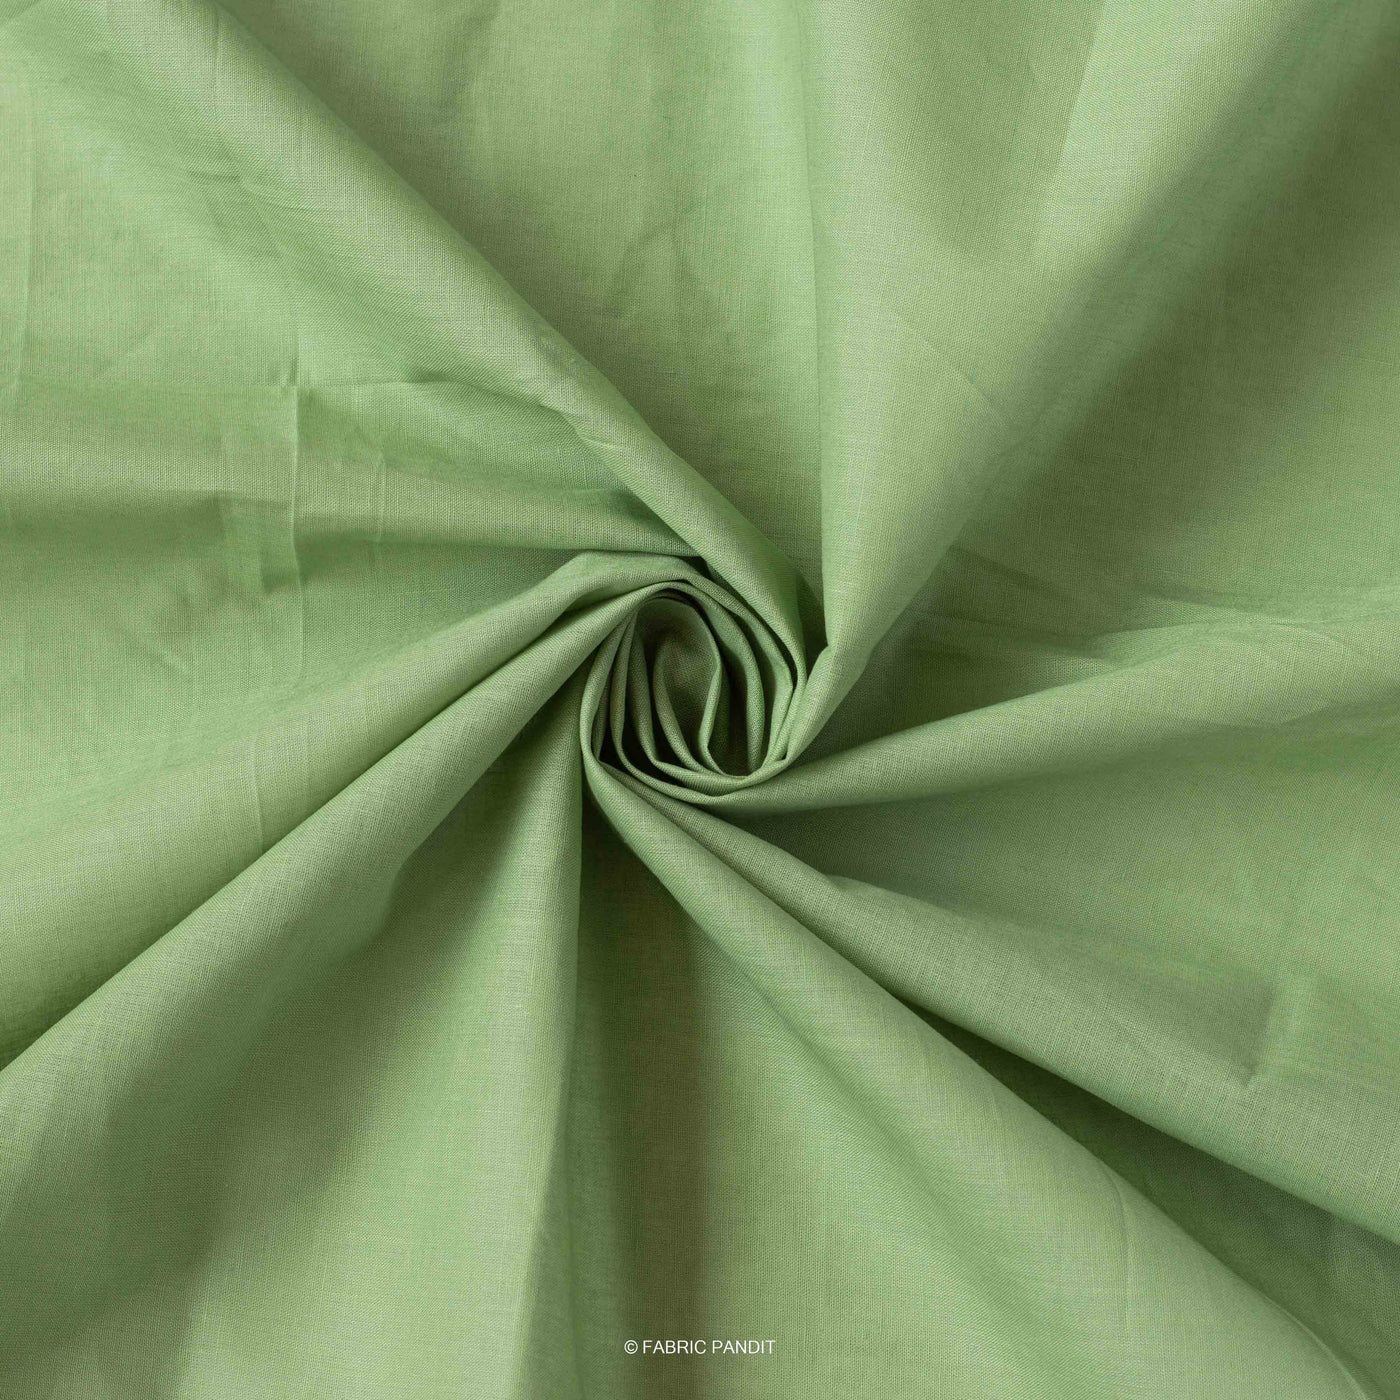 Fabric Pandit Fabric Leaf Green Color Pure Cotton Cambric Fabric (Width 42 Inches)